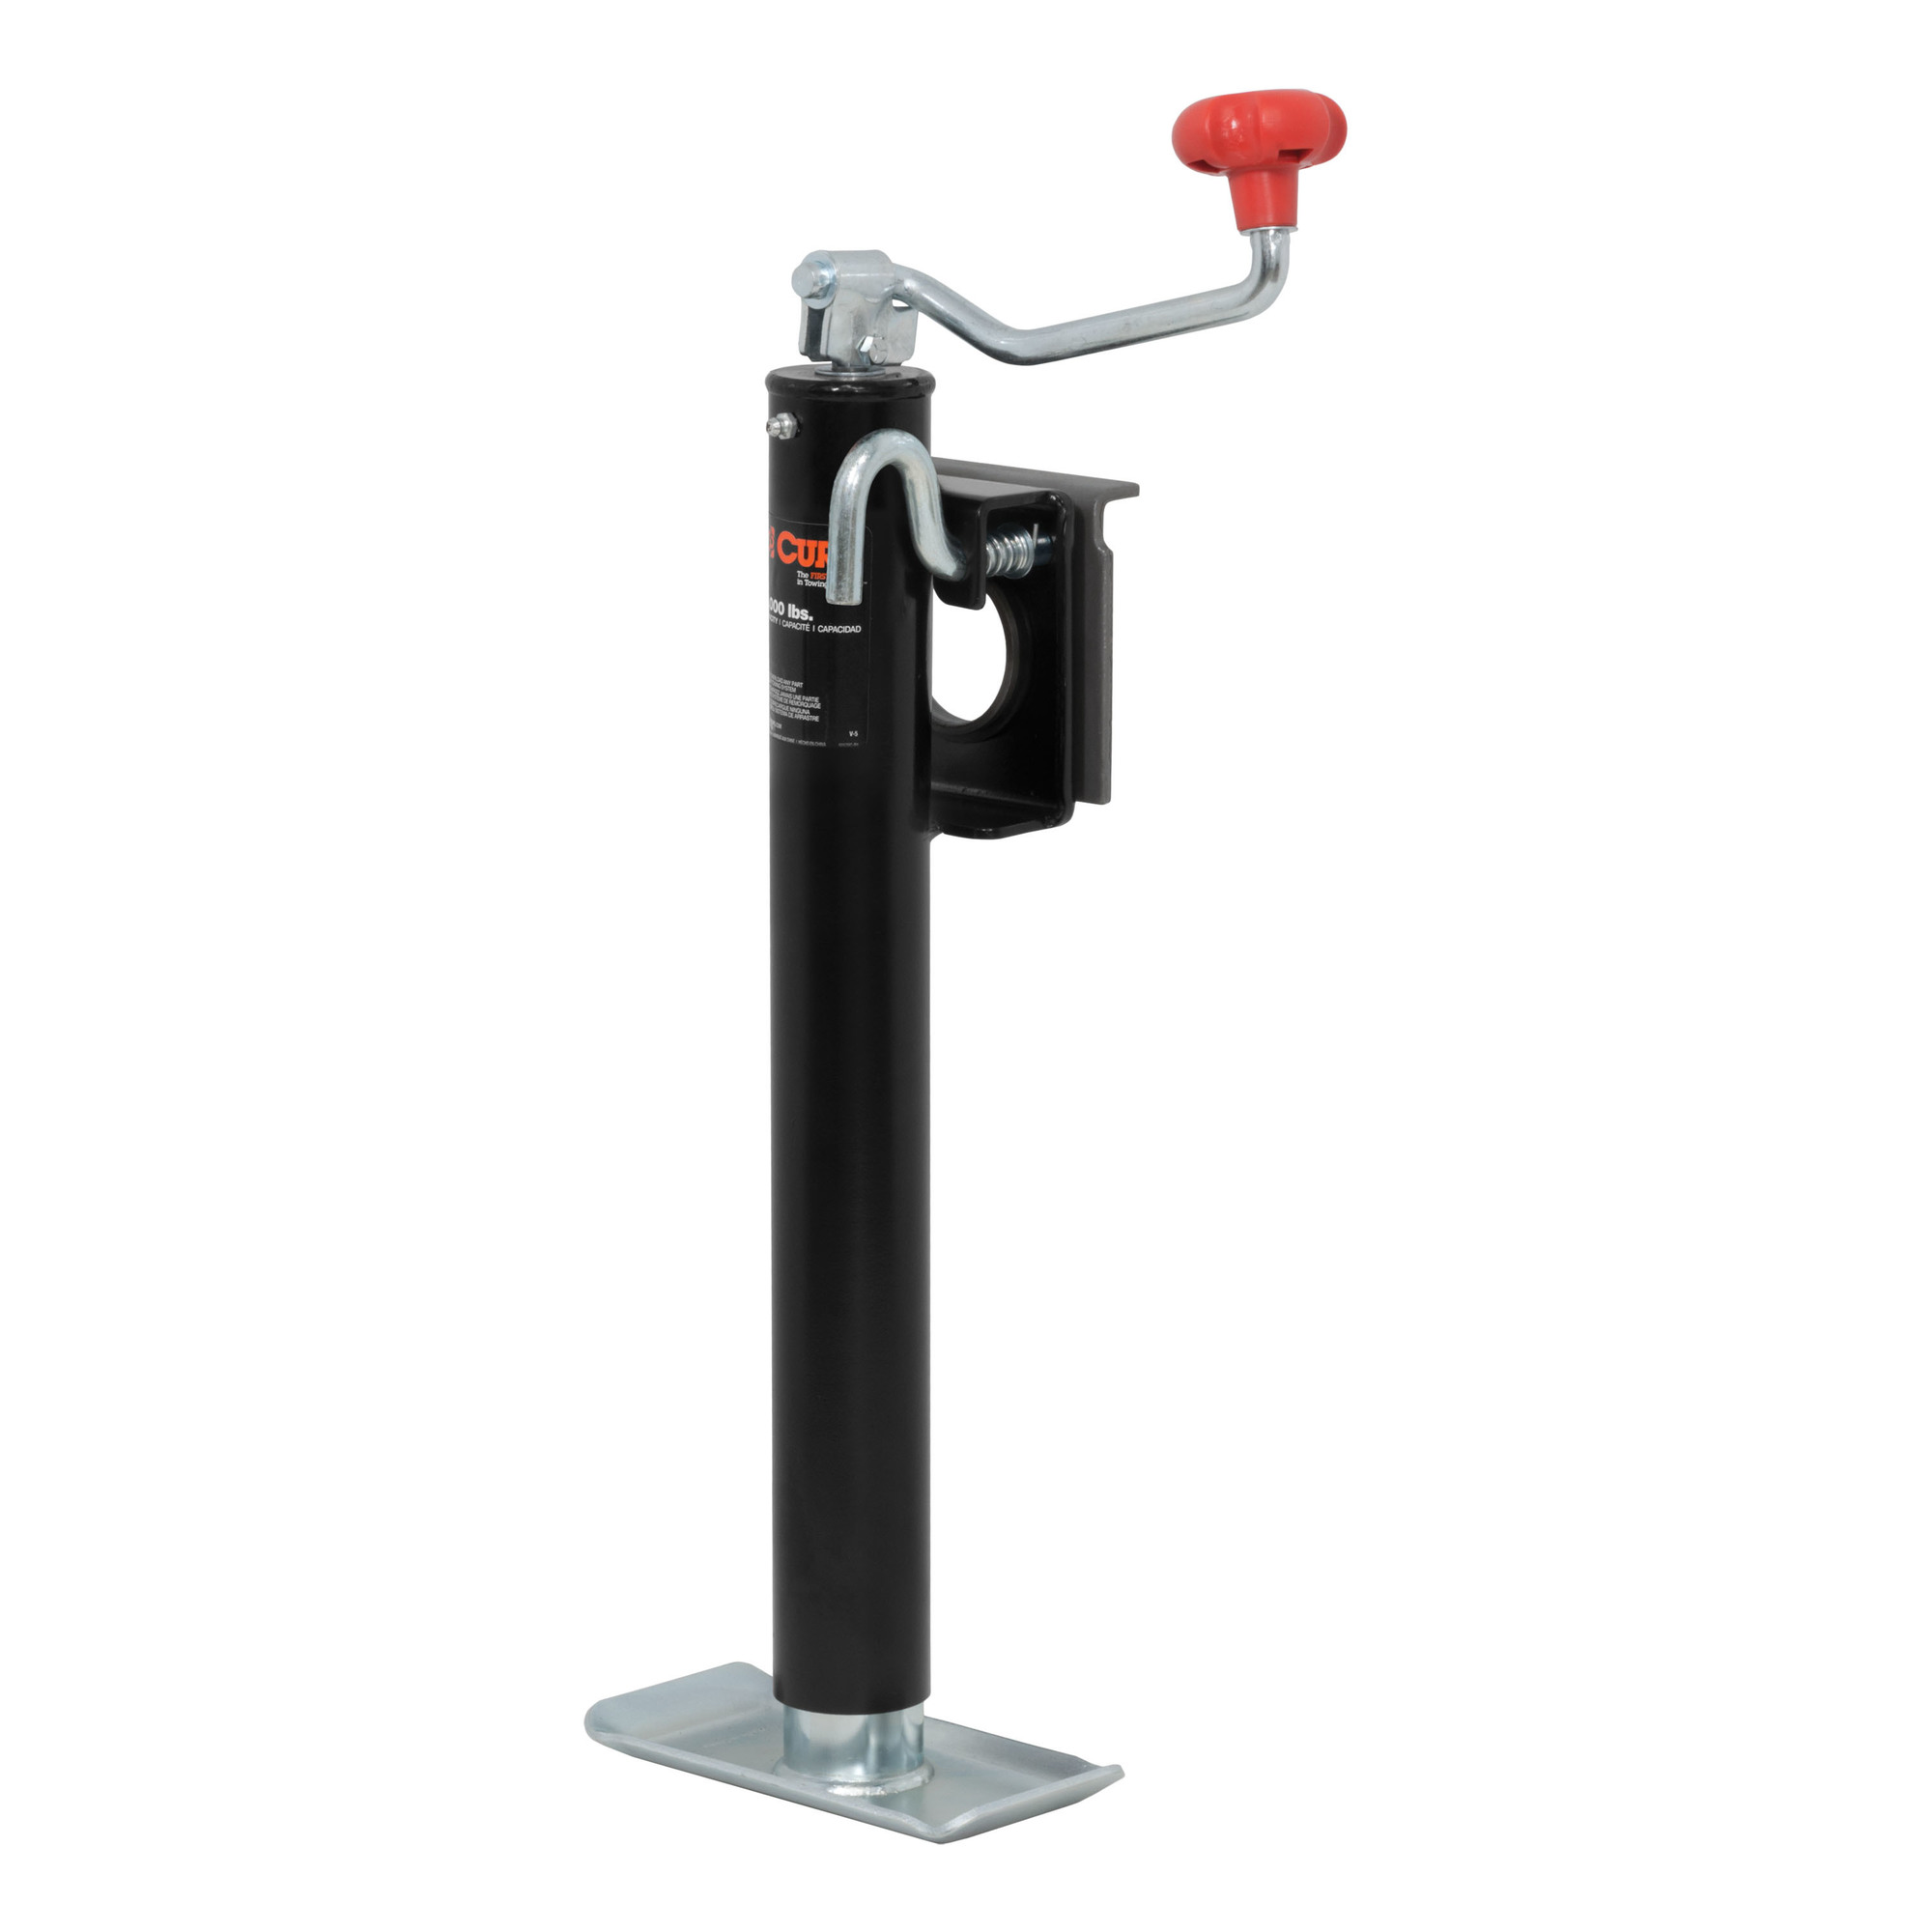 Curt Manufacturing, Bracket-Mnt Jack w Top Handle 2000 lbs 15Inch Travel, Lift Capacity 2000 lb, Jack Type Topwind, Mount Type Weld-On, Model 28304